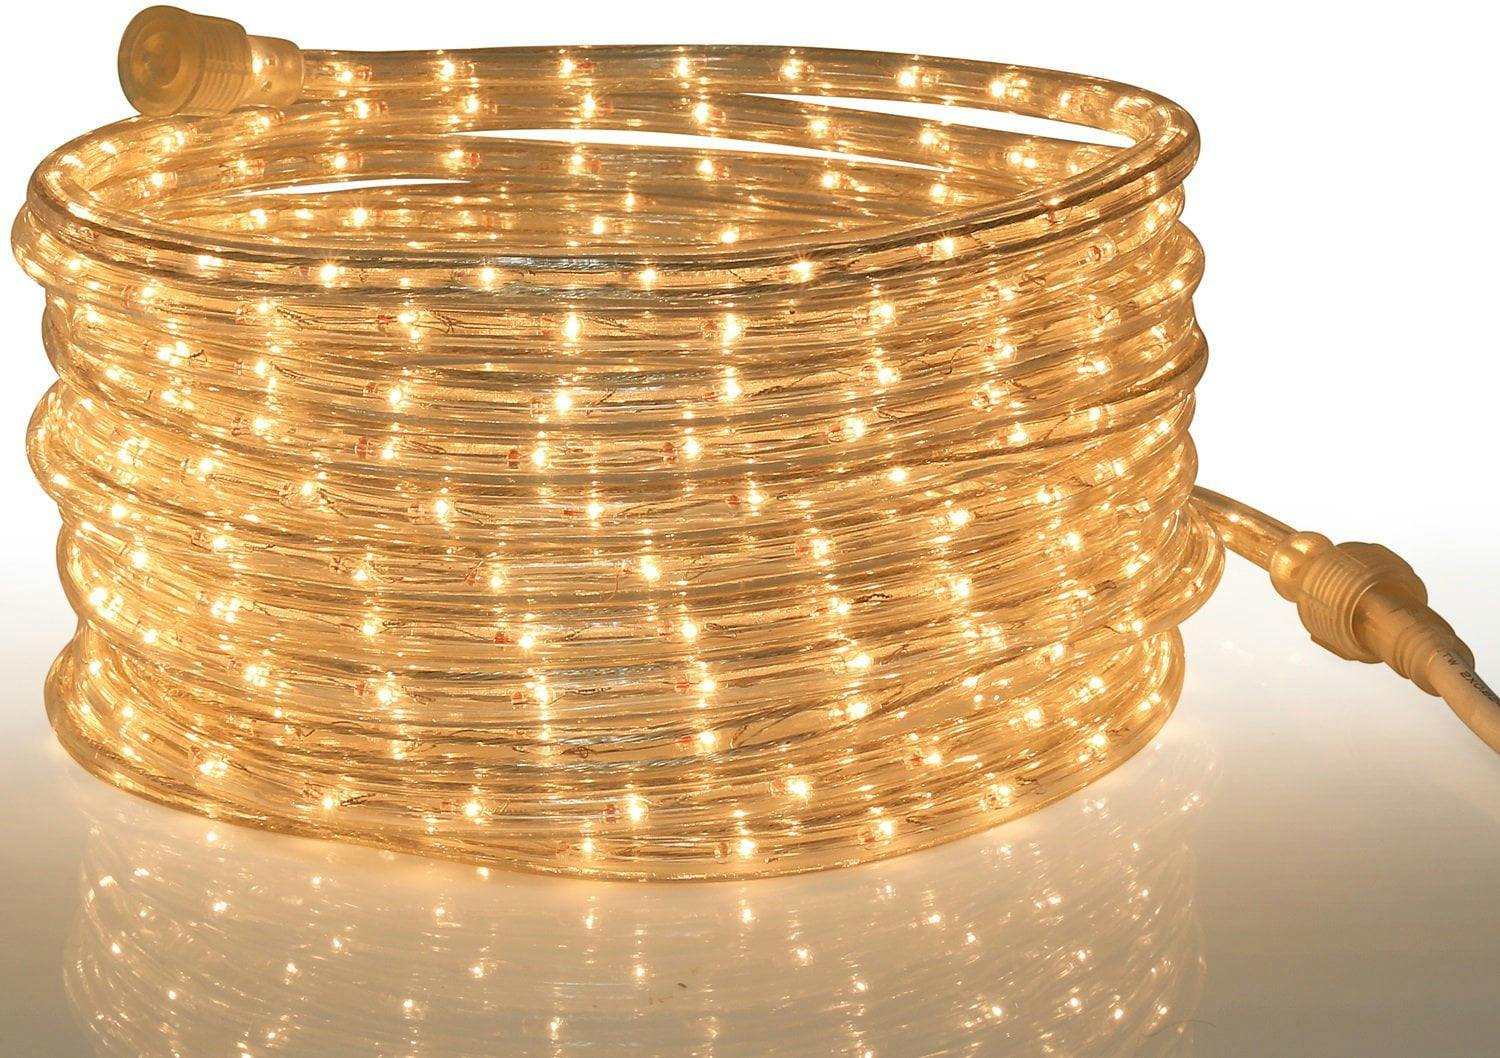 Modern Warm Clear 24ft Waterproof Incandescent Rope Light